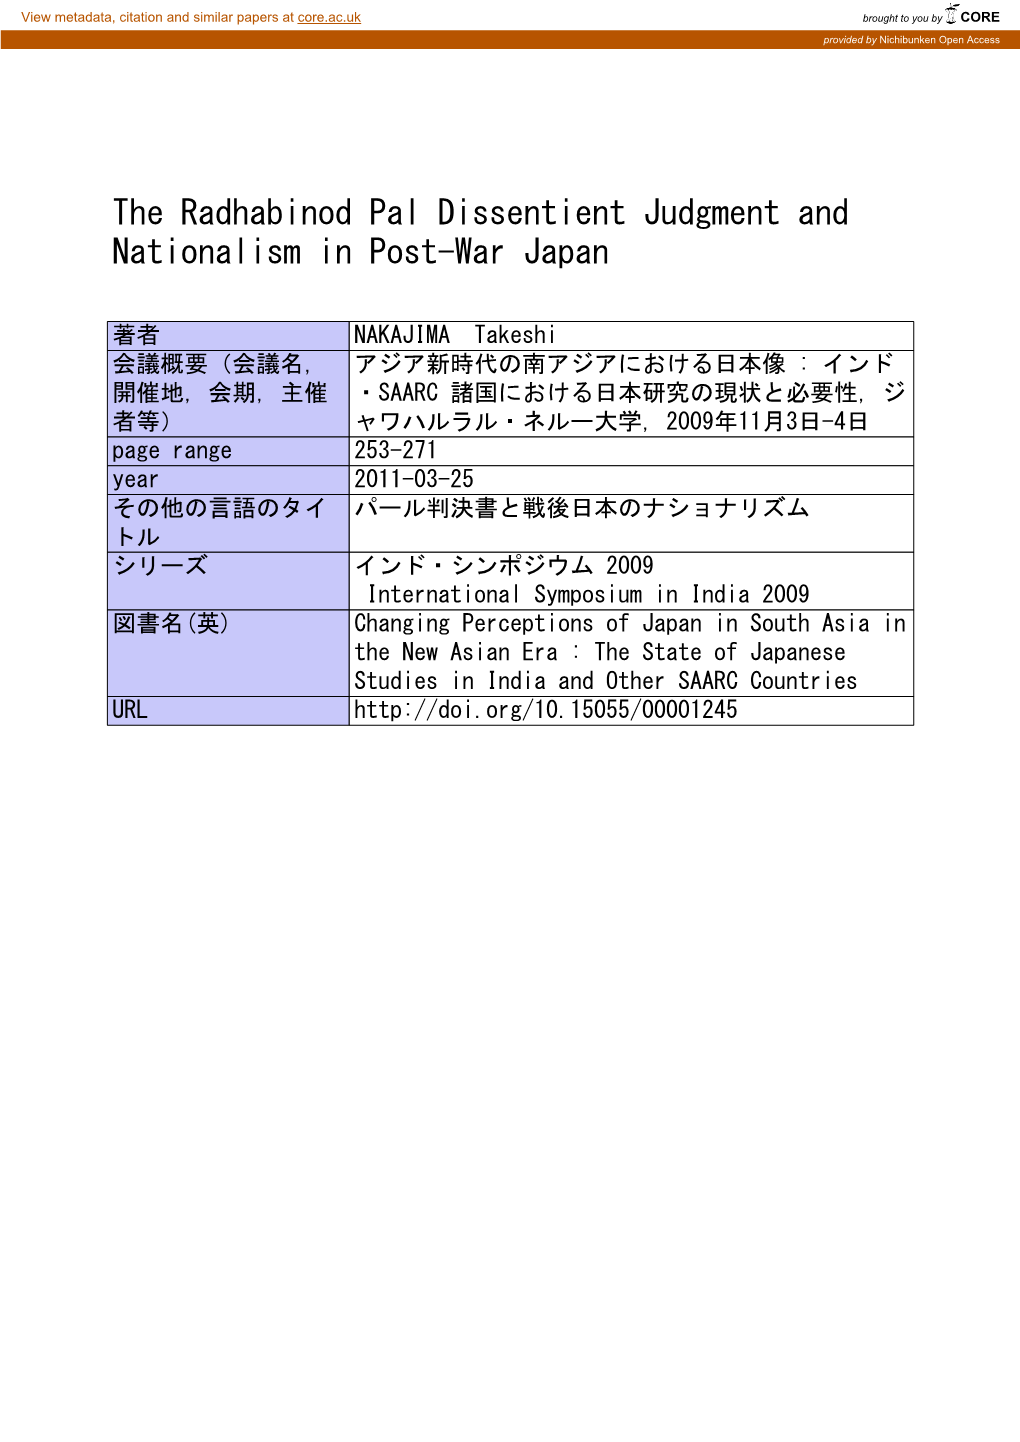 The Radhabinod Pal Dissentient Judgment and Nationalism in Post-War Japan